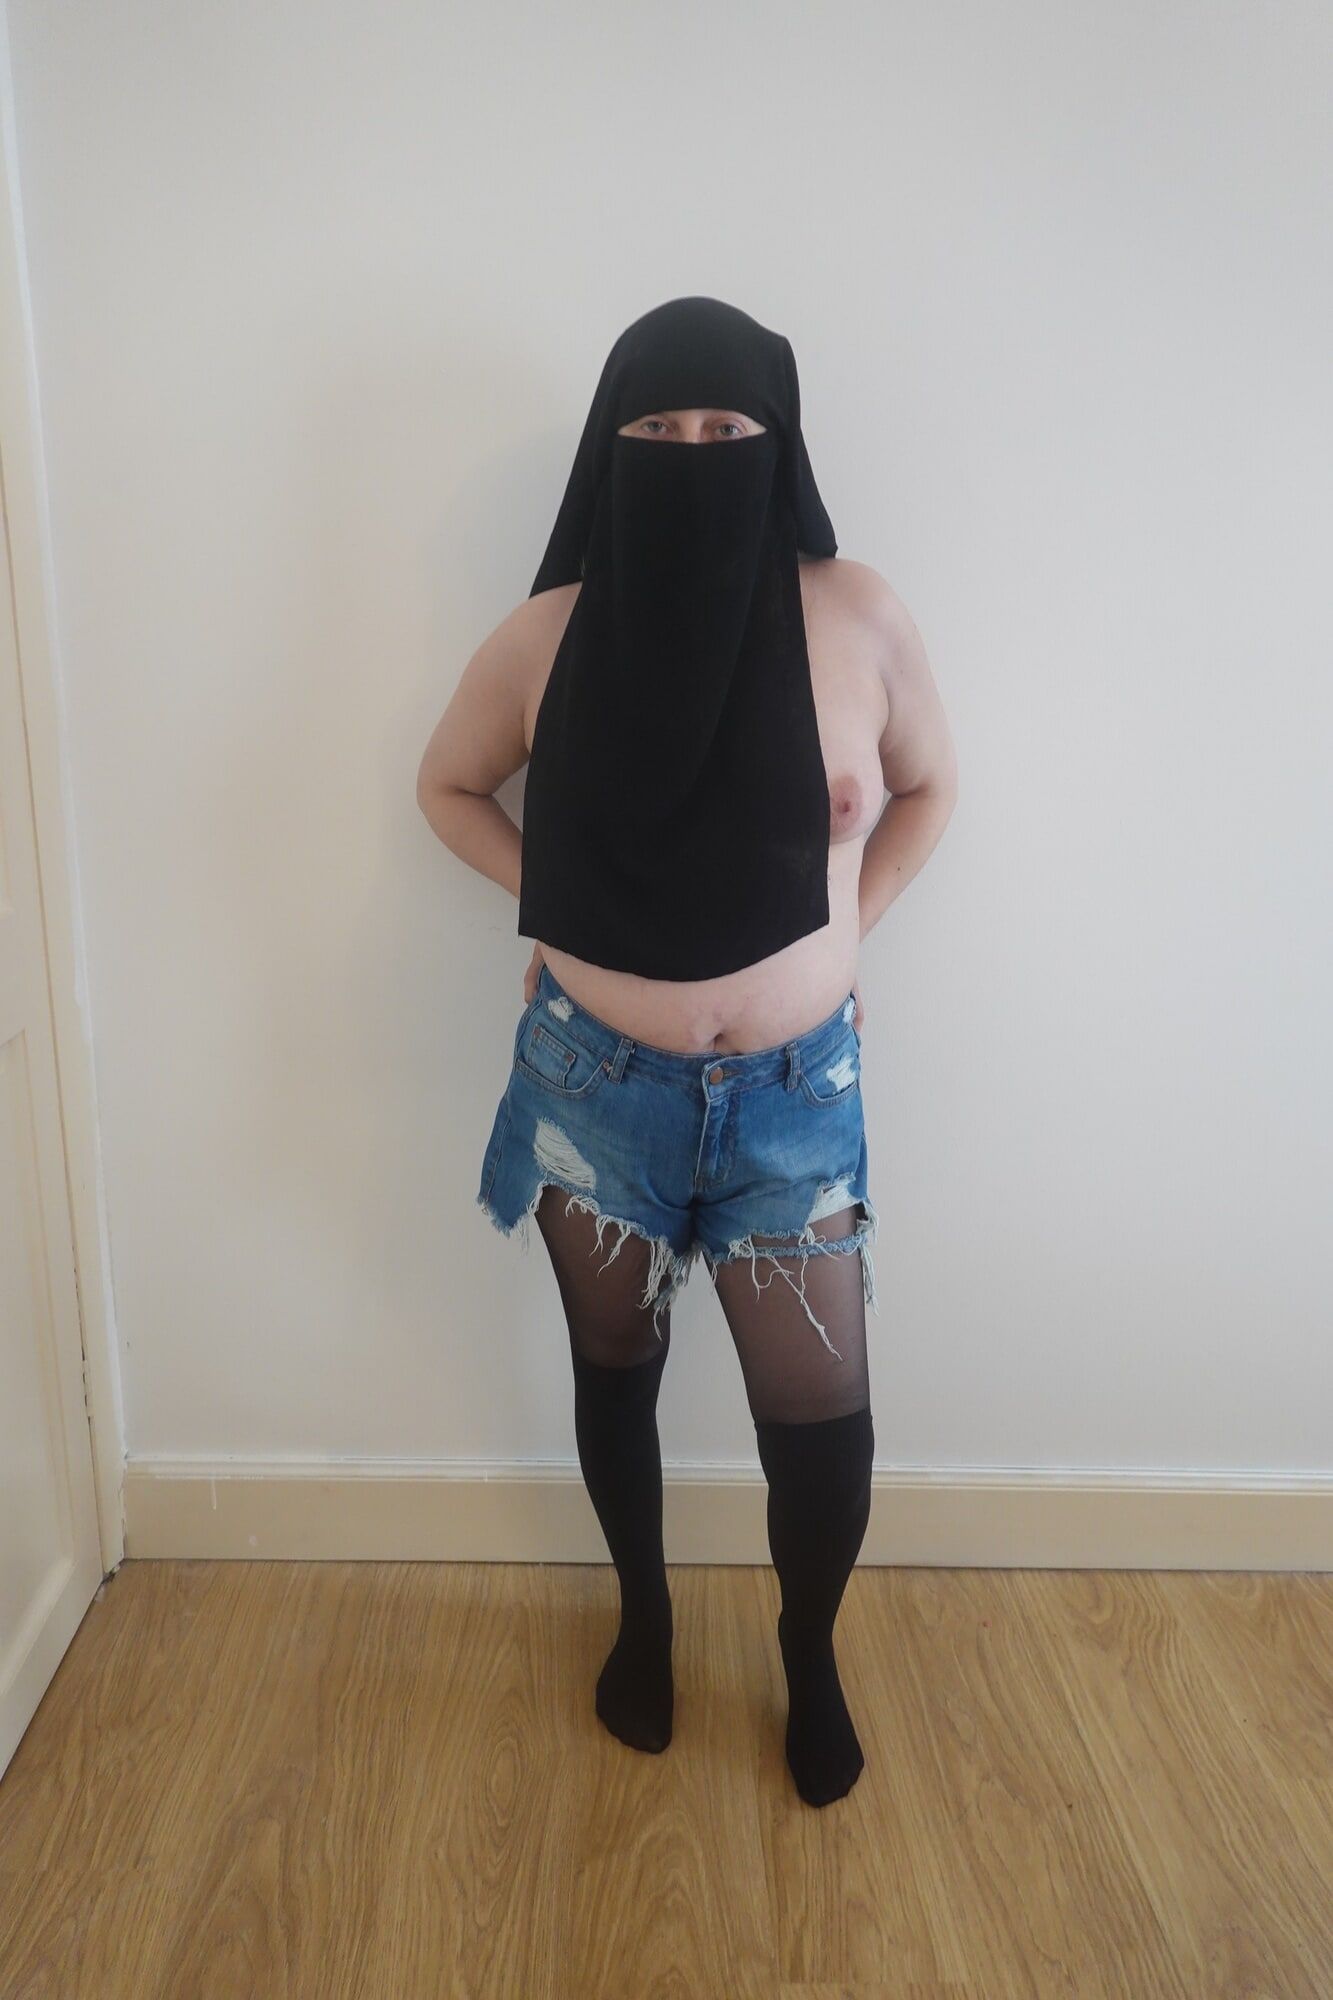 Wearing Shorts and pantyhose in Niqab 